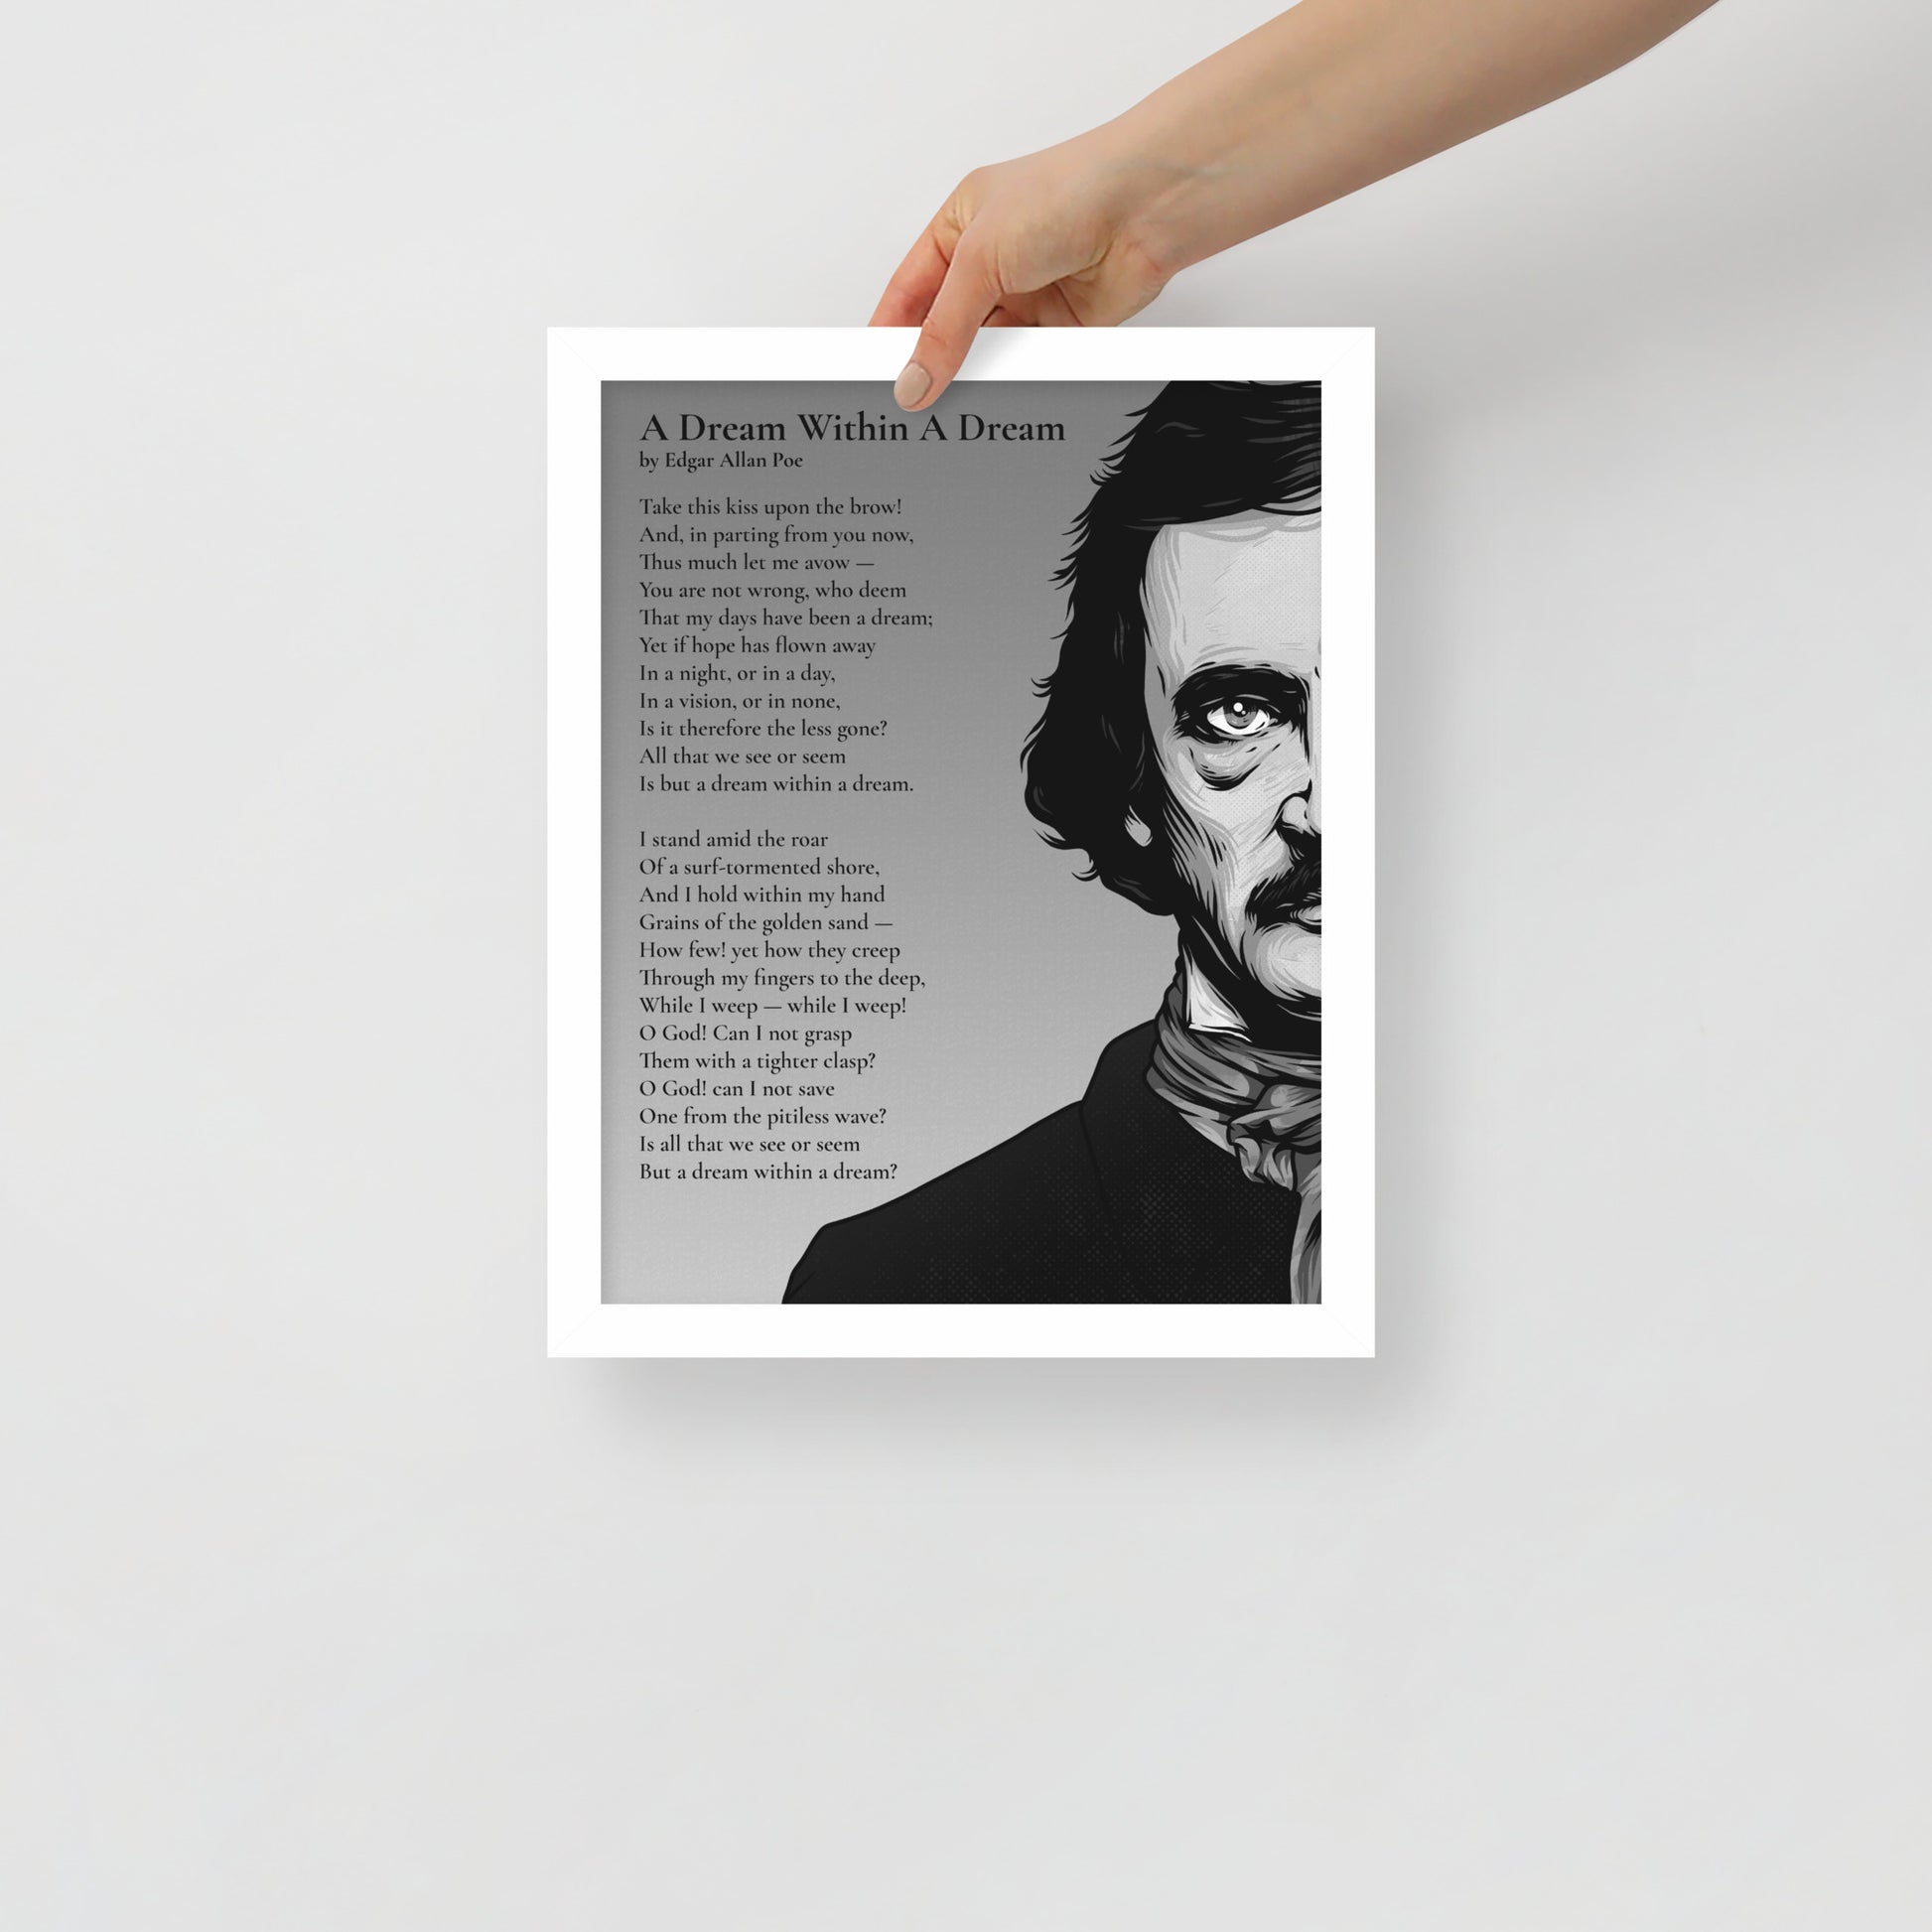 Edgar Allan Poe's 'A Dream Within a Dream' Framed Matted Poster - 11 x 14 White Frame